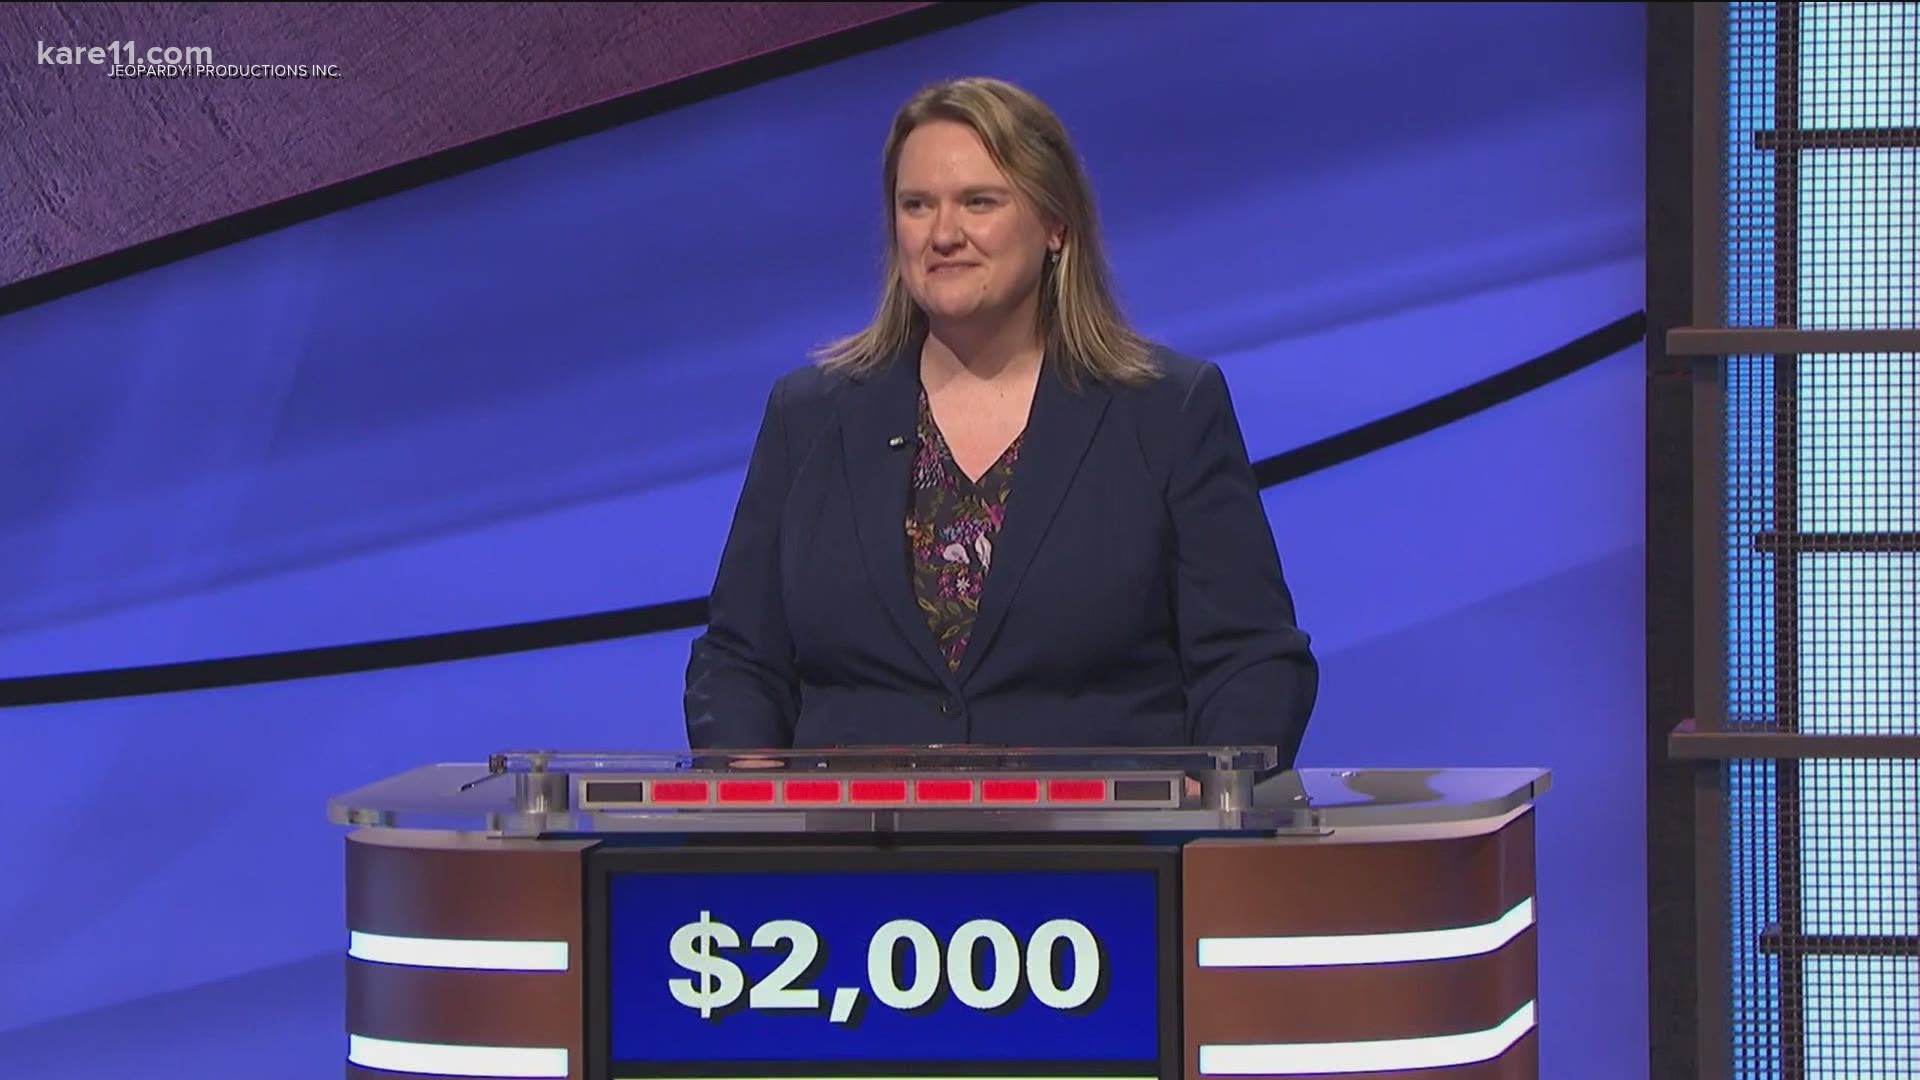 Emily Sands won $73,000 during her run on the show.